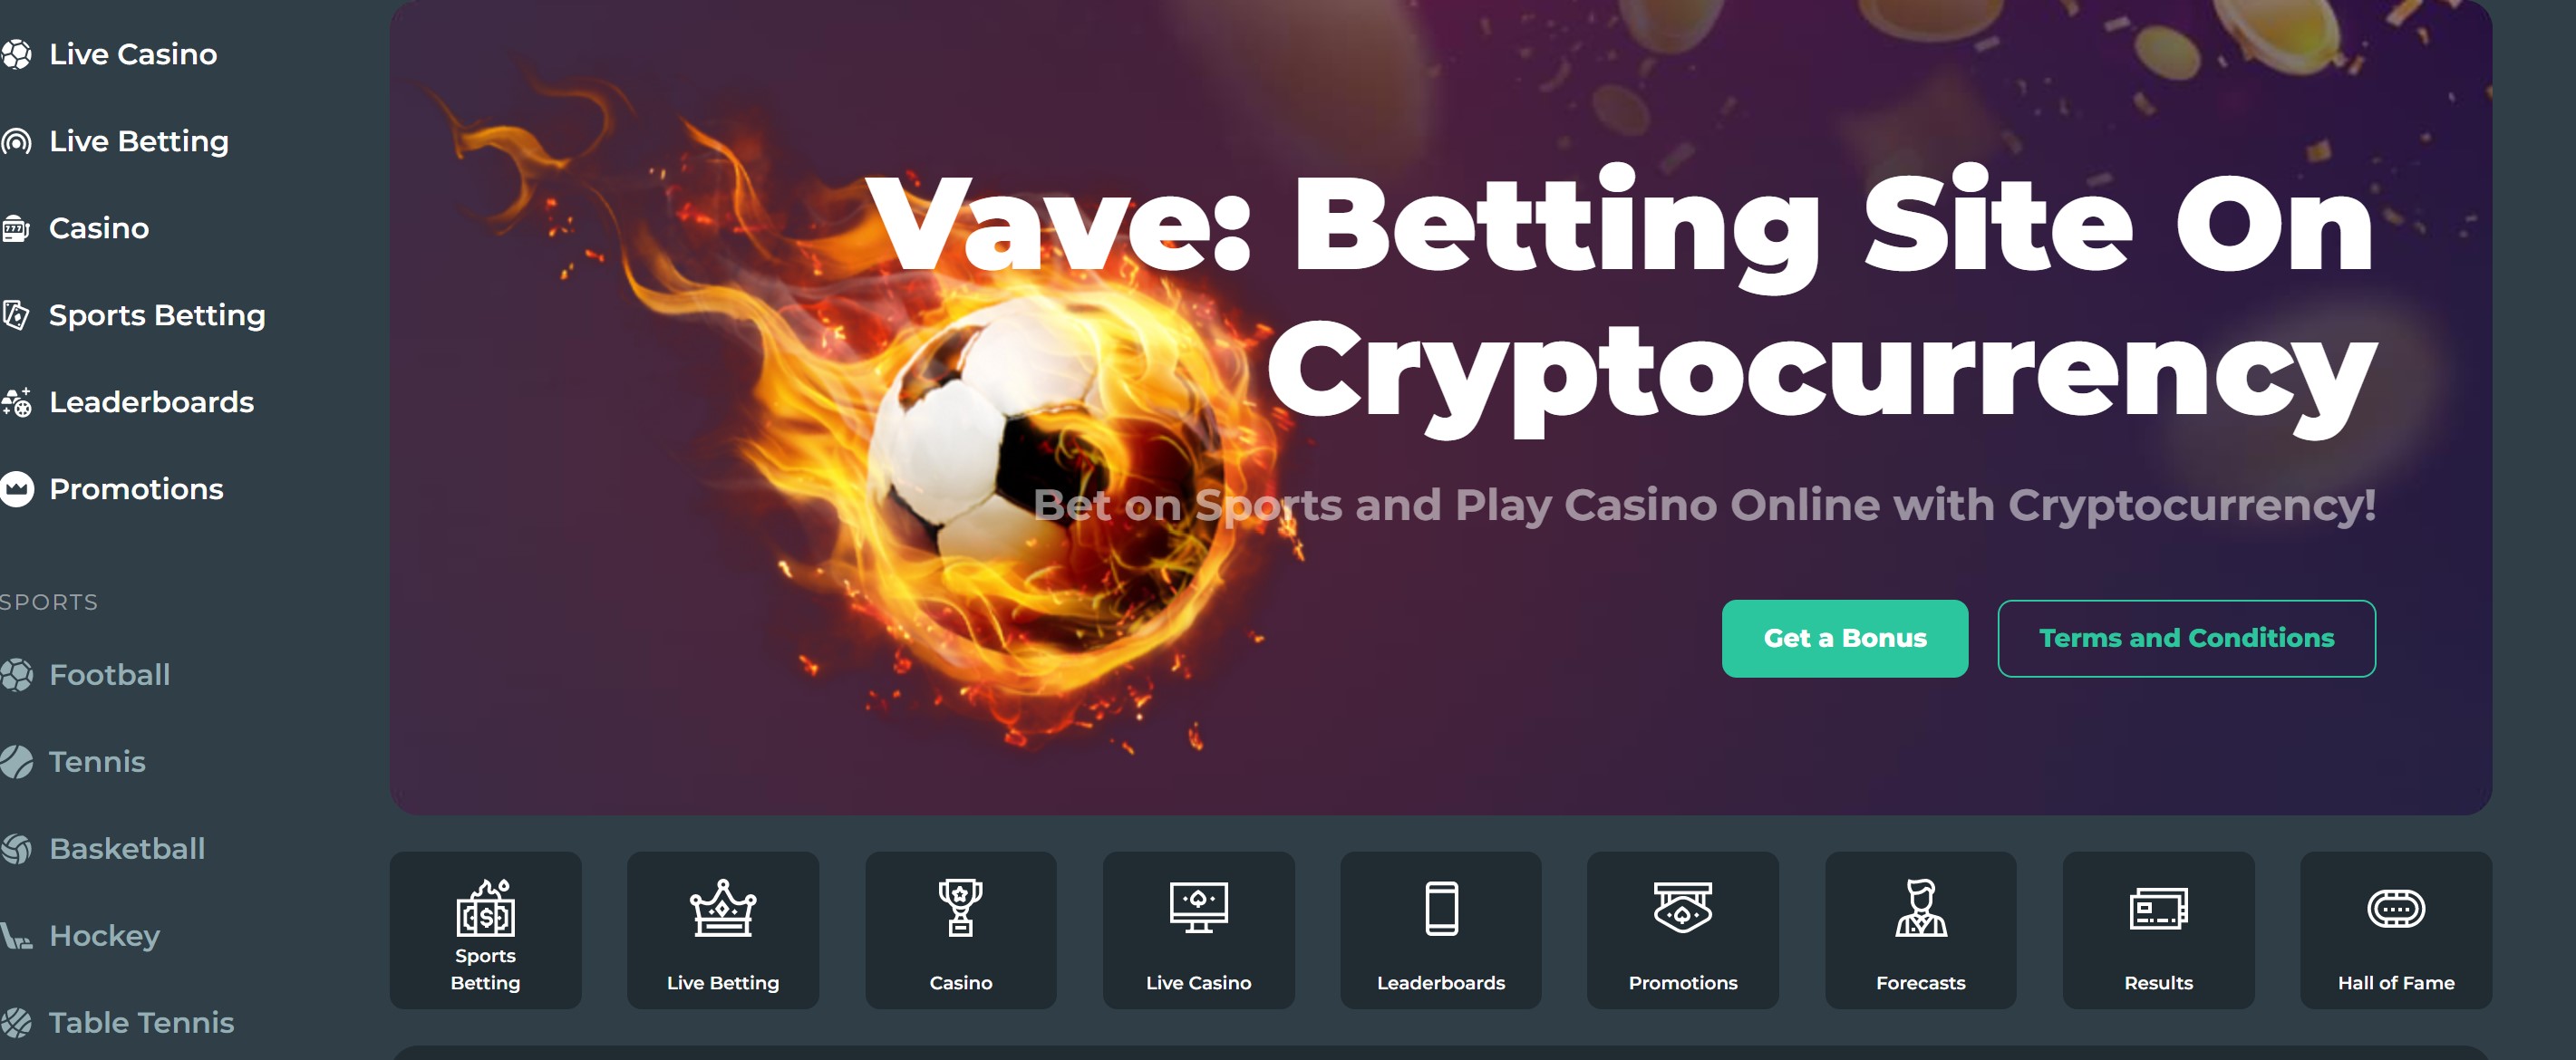 tether gambling Made Simple - Even Your Kids Can Do It